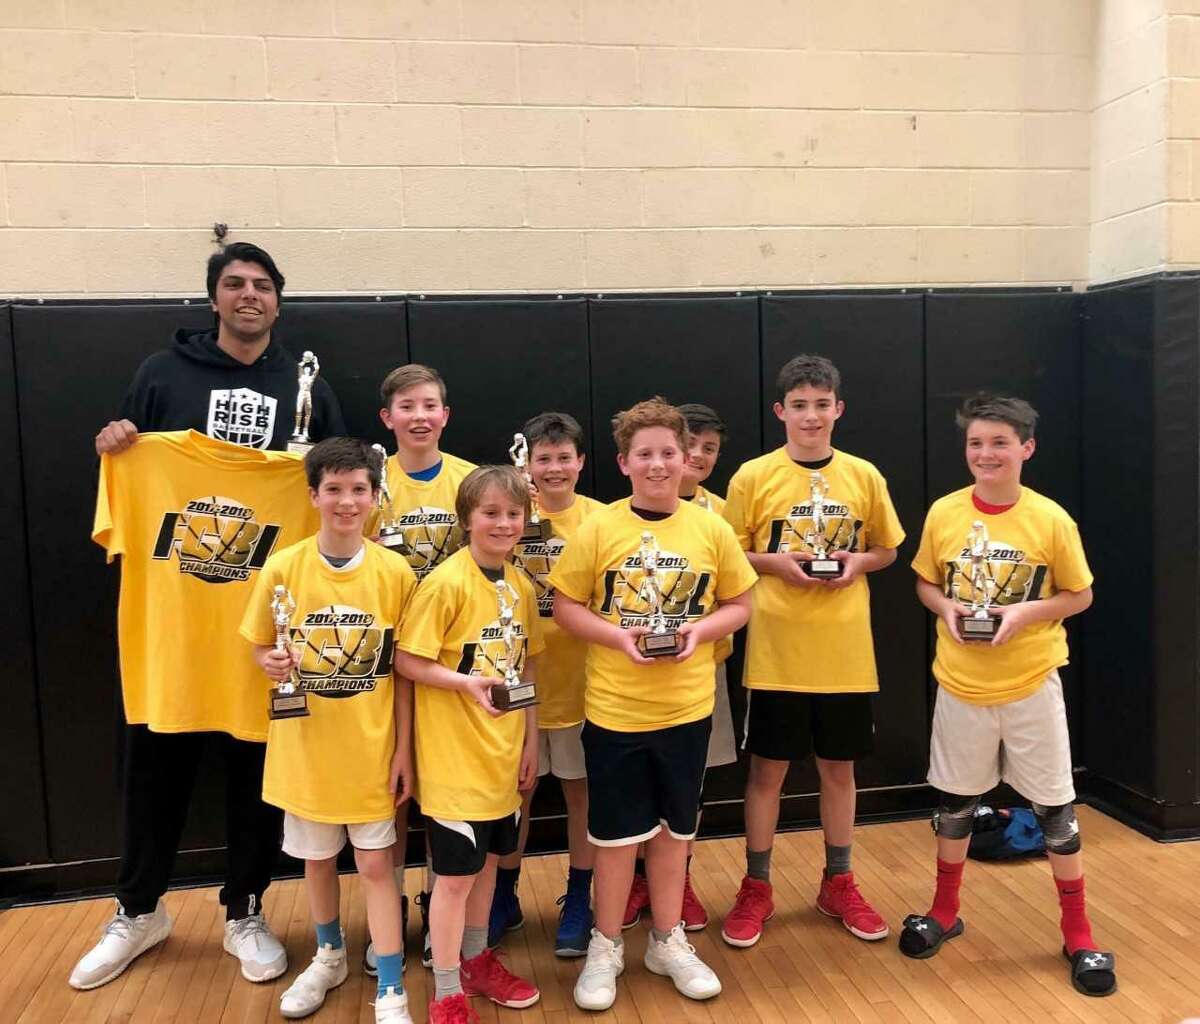 The Greenwich Select Boys Red Team, a squad that is part of High Rise Basketball Academy, captured its division title at the Fairfield County Basketball League Championships recently at Fairfield Ludowe High School. Greenwich defeated Weston 43-30 in the championship game.